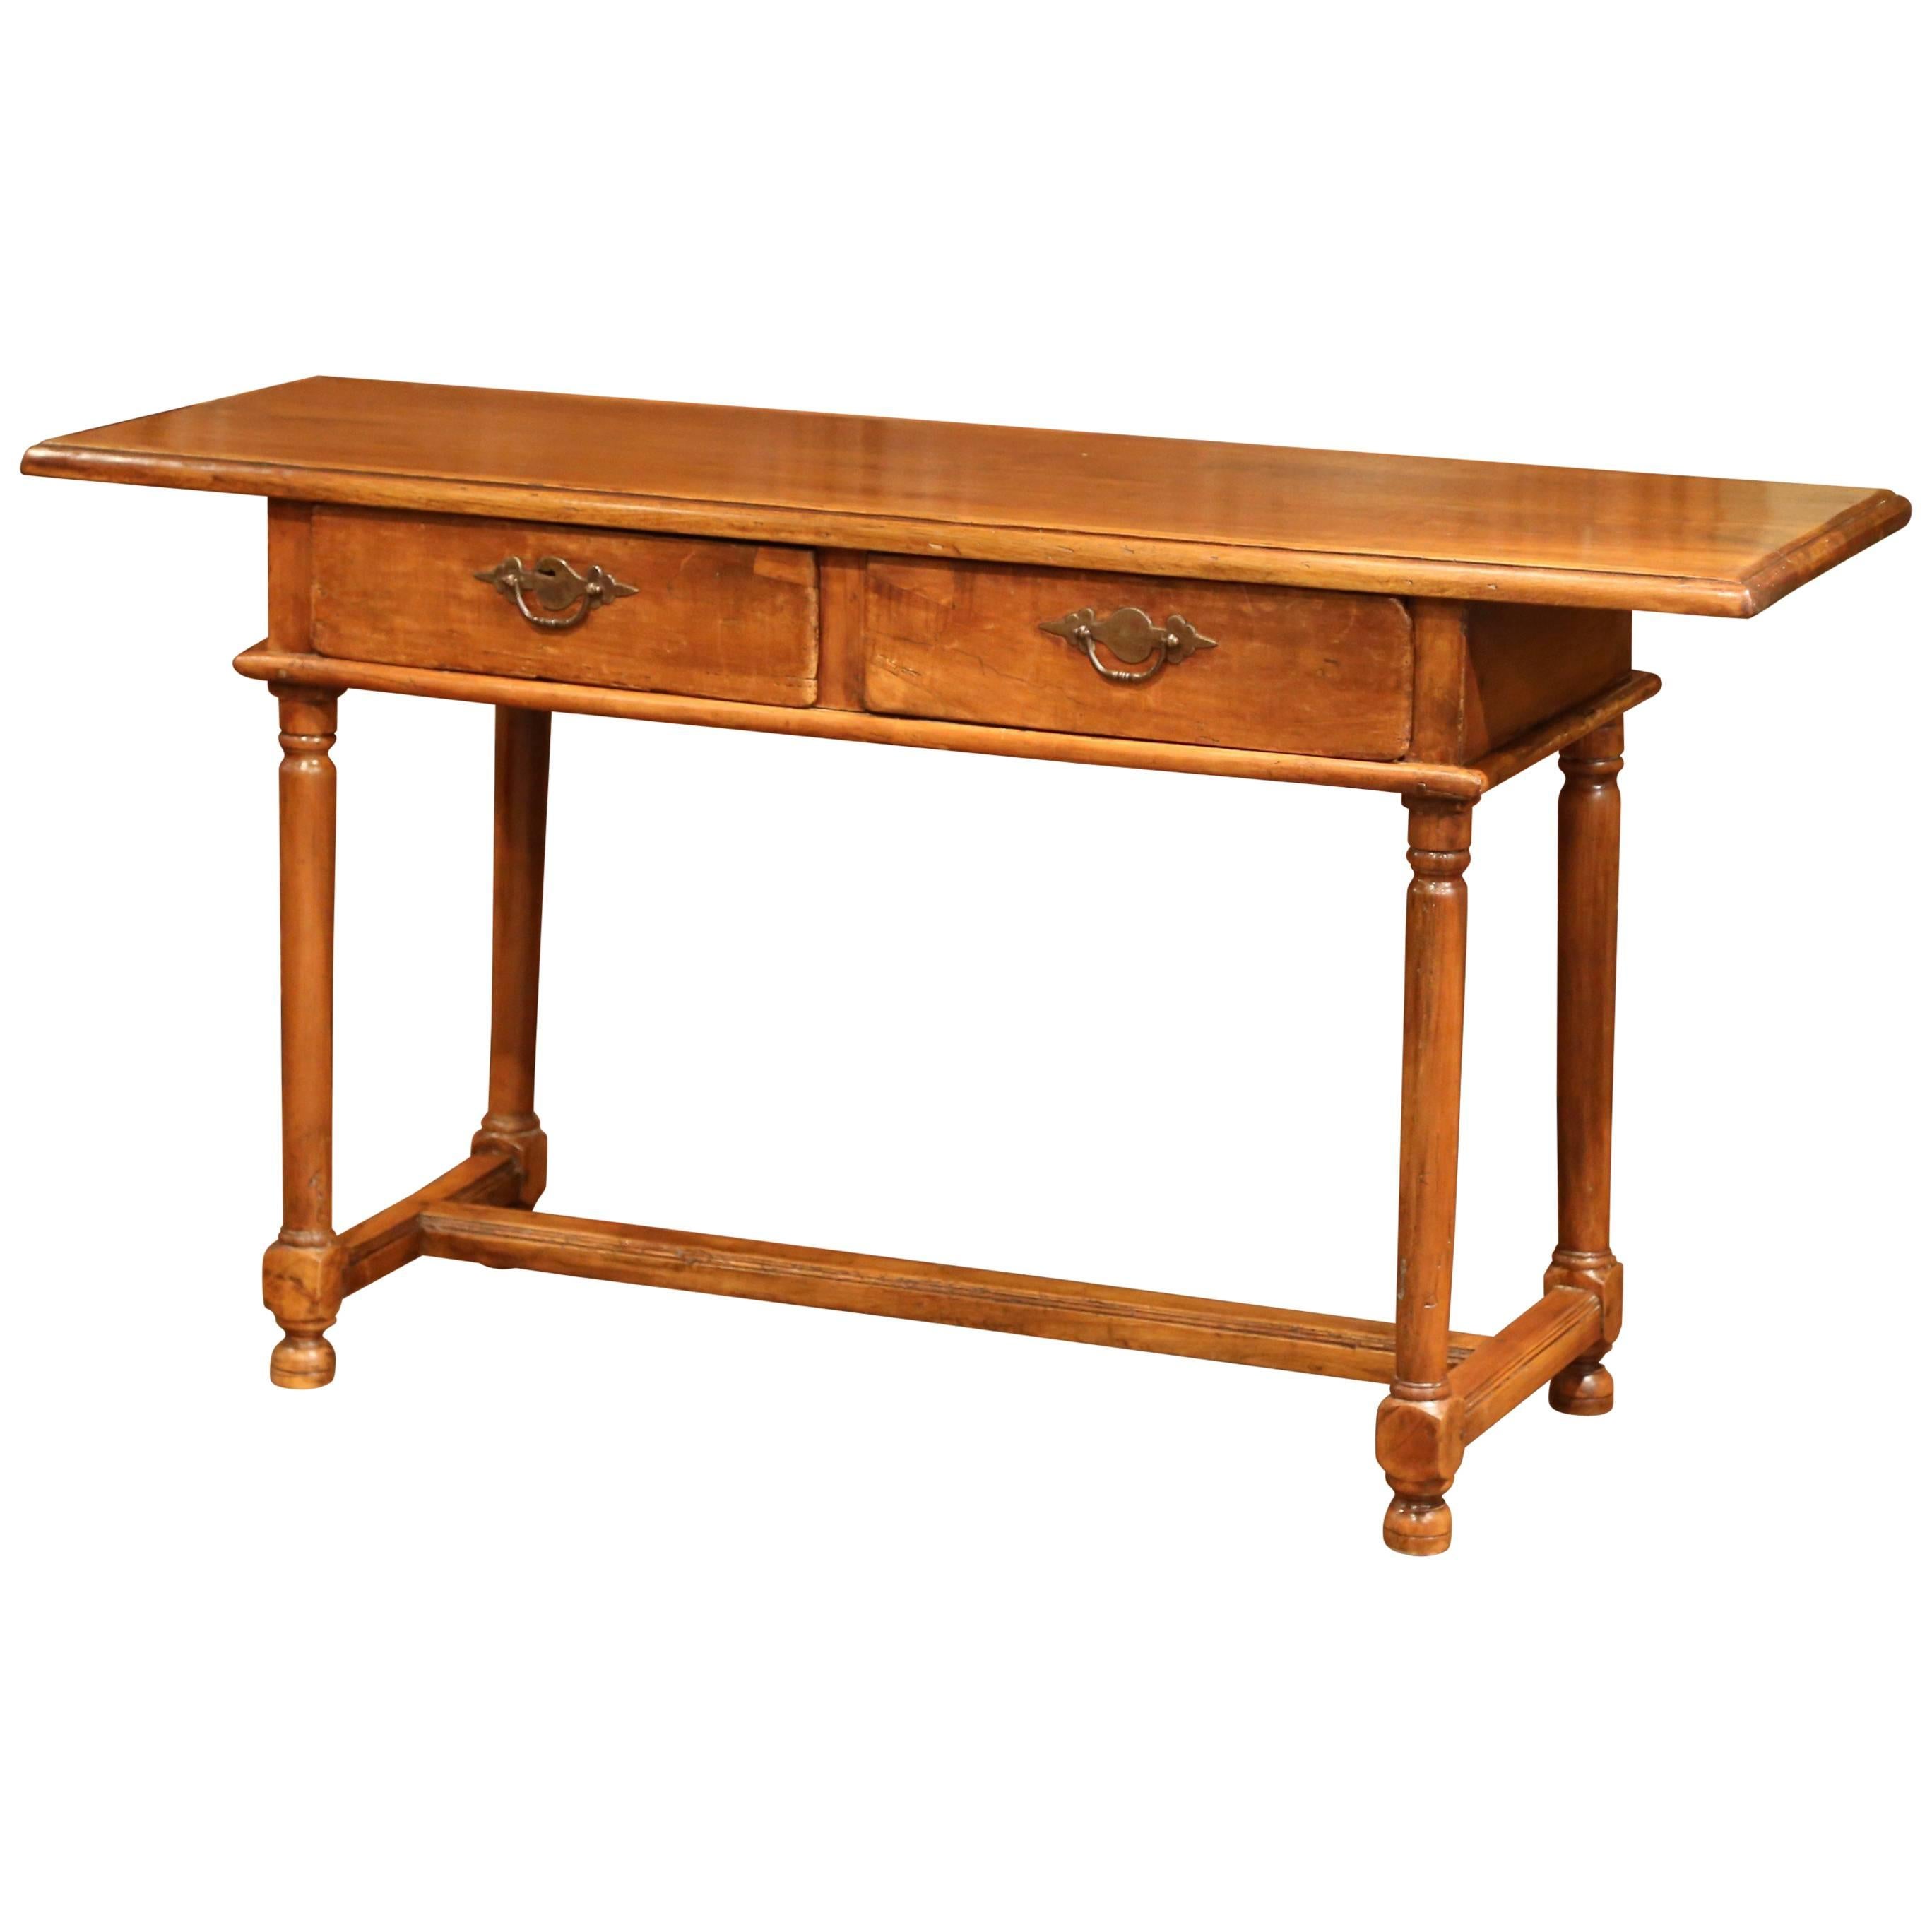 Early 19th Century Empire Walnut Console Table with Drawers